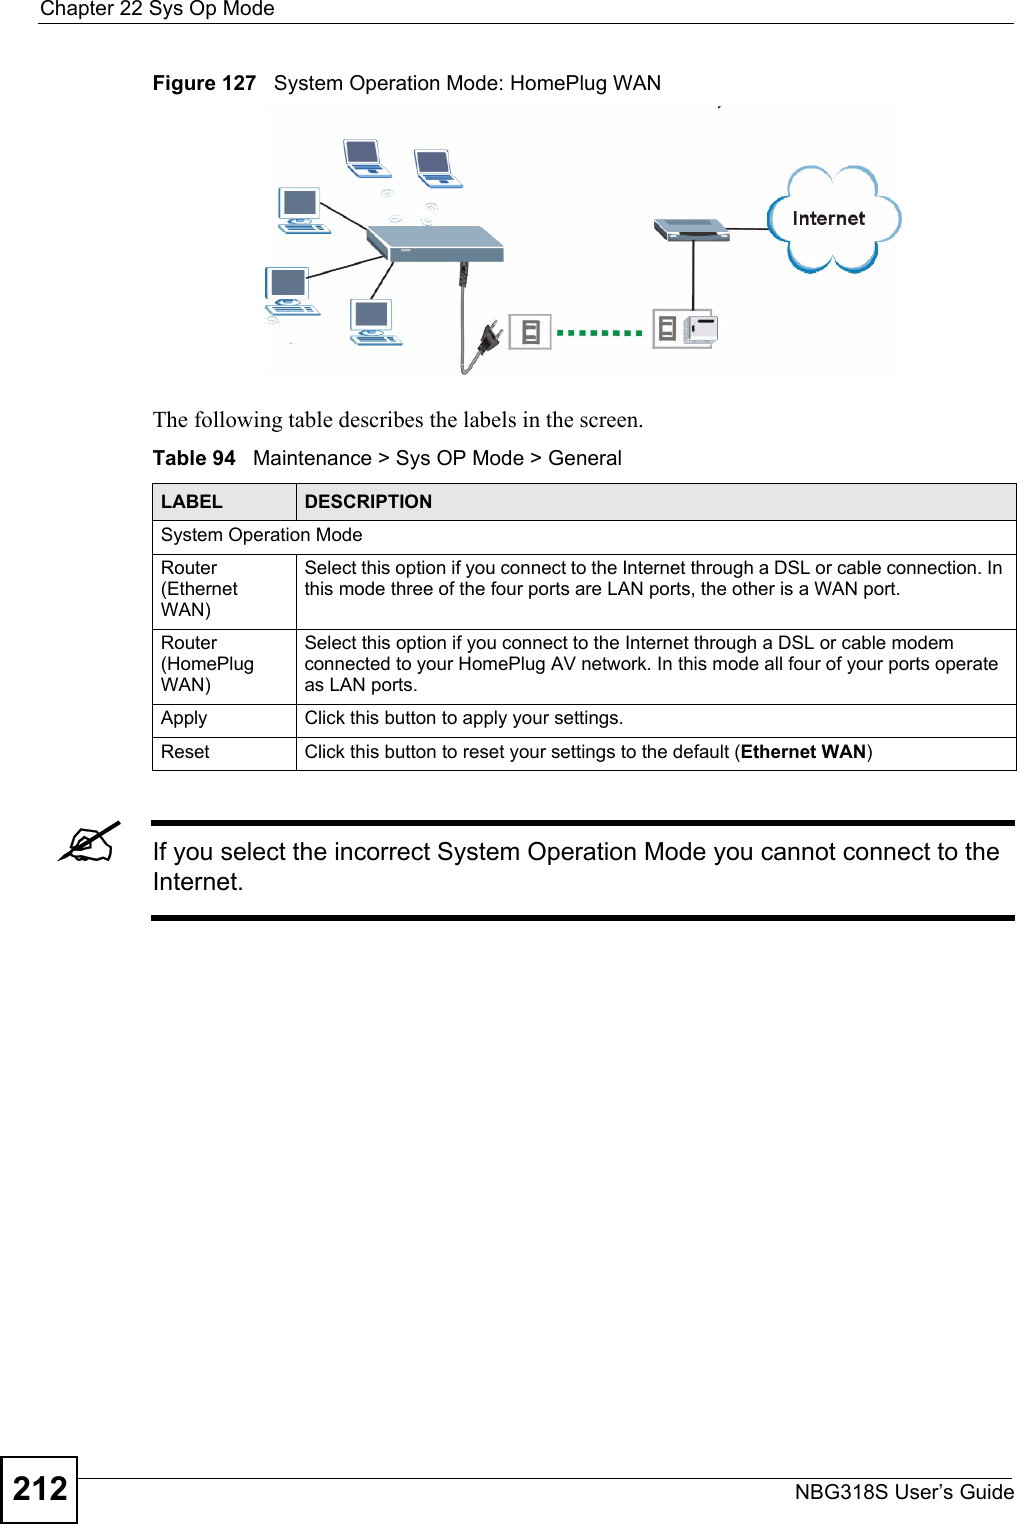 Chapter 22 Sys Op ModeNBG318S User’s Guide212Figure 127   System Operation Mode: HomePlug WAN The following table describes the labels in the screen.Table 94   Maintenance &gt; Sys OP Mode &gt; General &quot;If you select the incorrect System Operation Mode you cannot connect to the Internet.LABEL DESCRIPTIONSystem Operation ModeRouter (Ethernet WAN)Select this option if you connect to the Internet through a DSL or cable connection. In this mode three of the four ports are LAN ports, the other is a WAN port. Router (HomePlug WAN)Select this option if you connect to the Internet through a DSL or cable modem connected to your HomePlug AV network. In this mode all four of your ports operate as LAN ports.Apply Click this button to apply your settings.Reset Click this button to reset your settings to the default (Ethernet WAN)